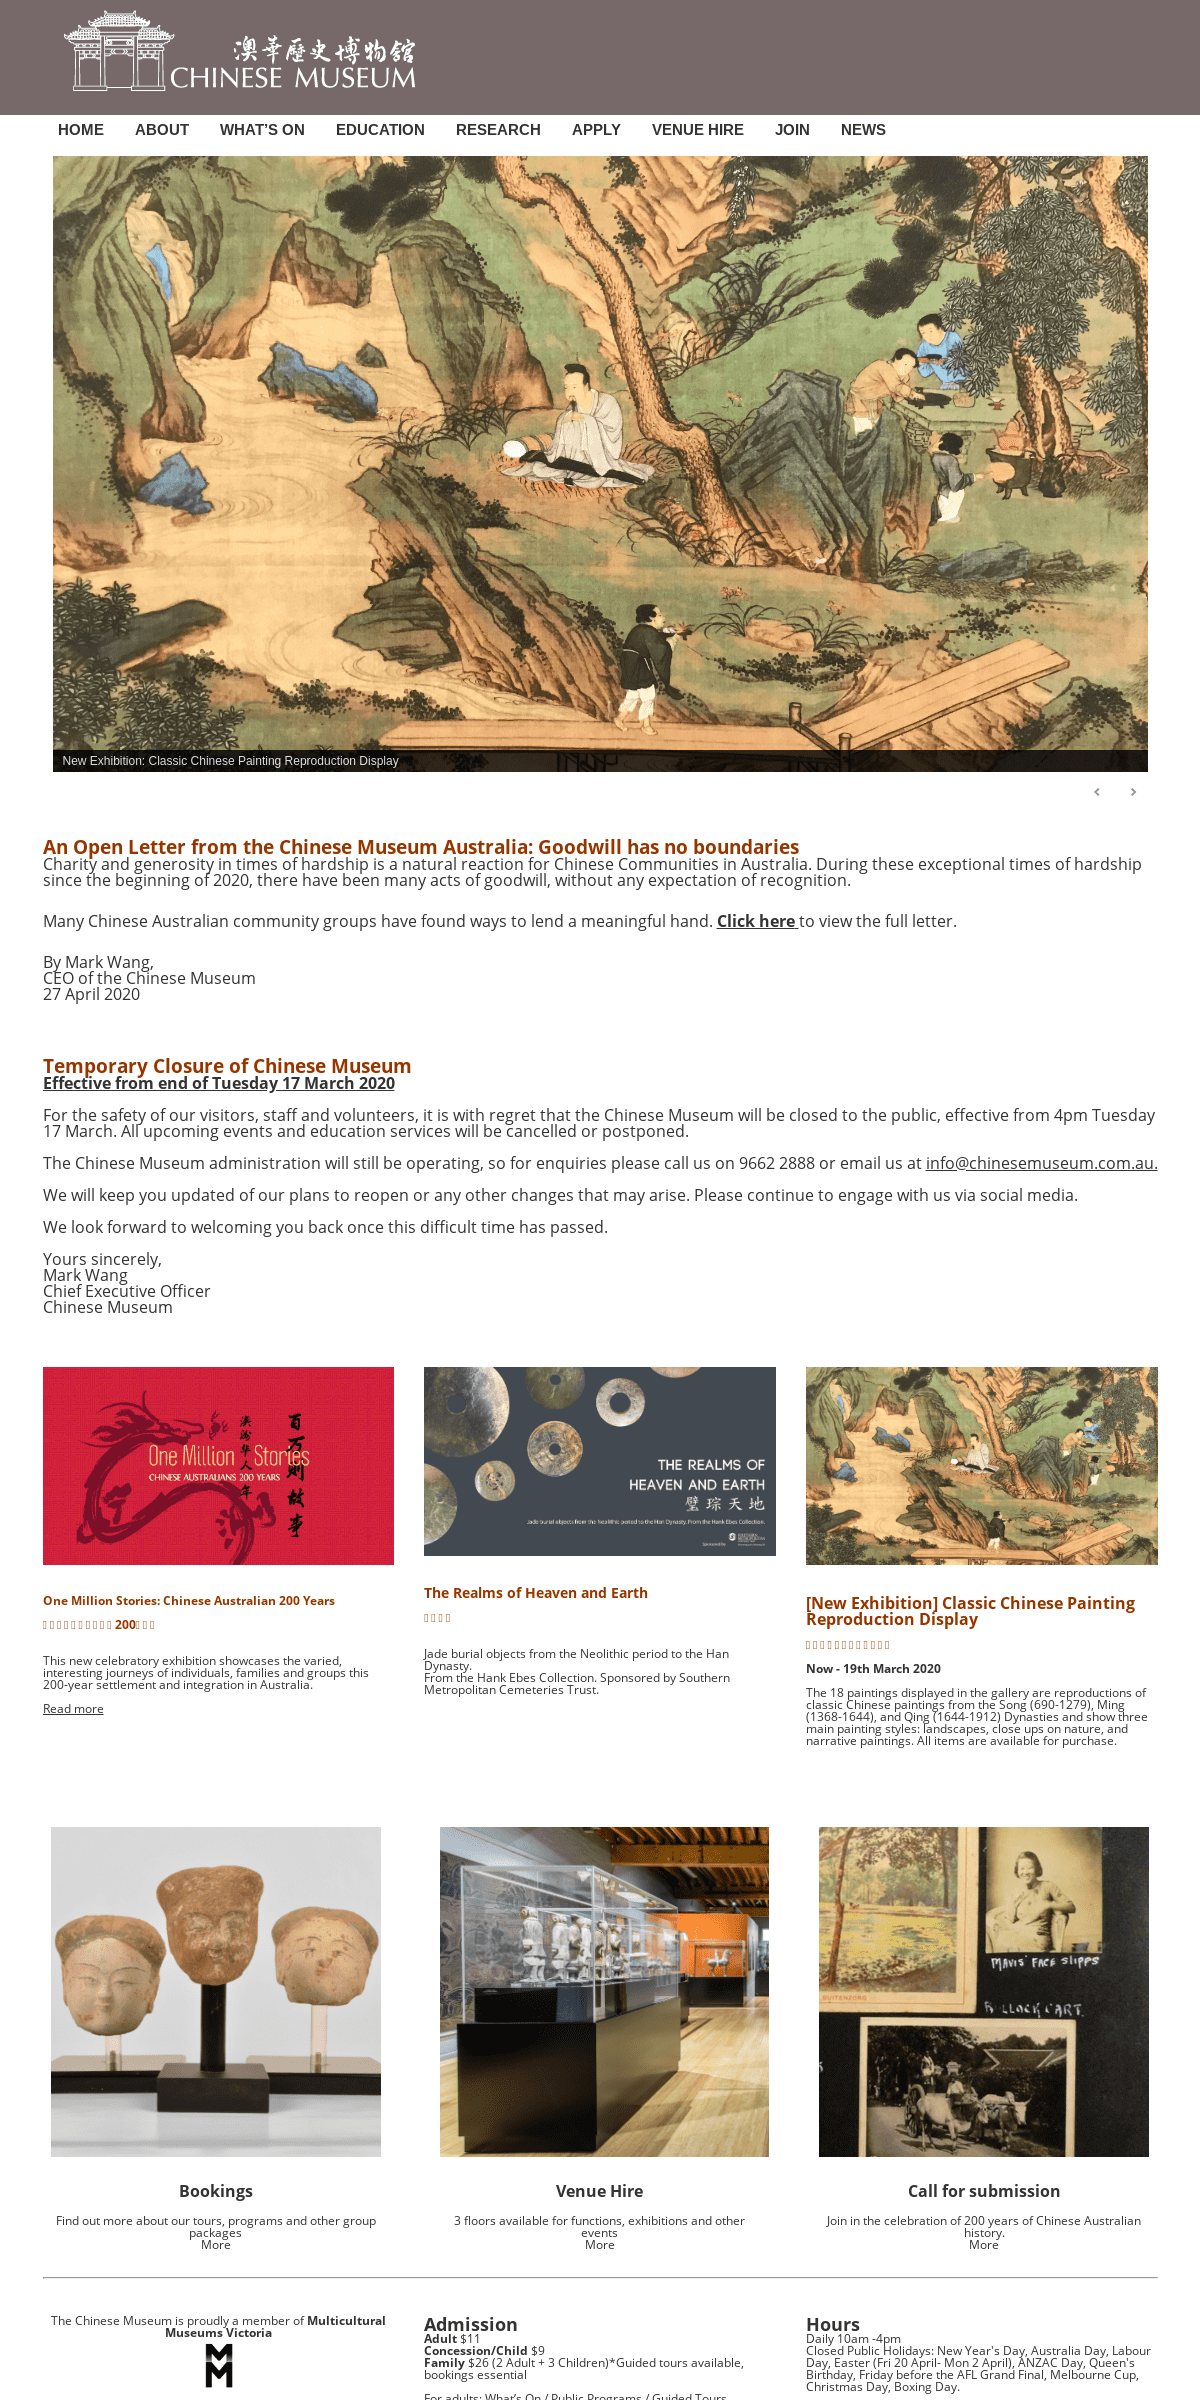 A complete backup of chinesemuseum.com.au